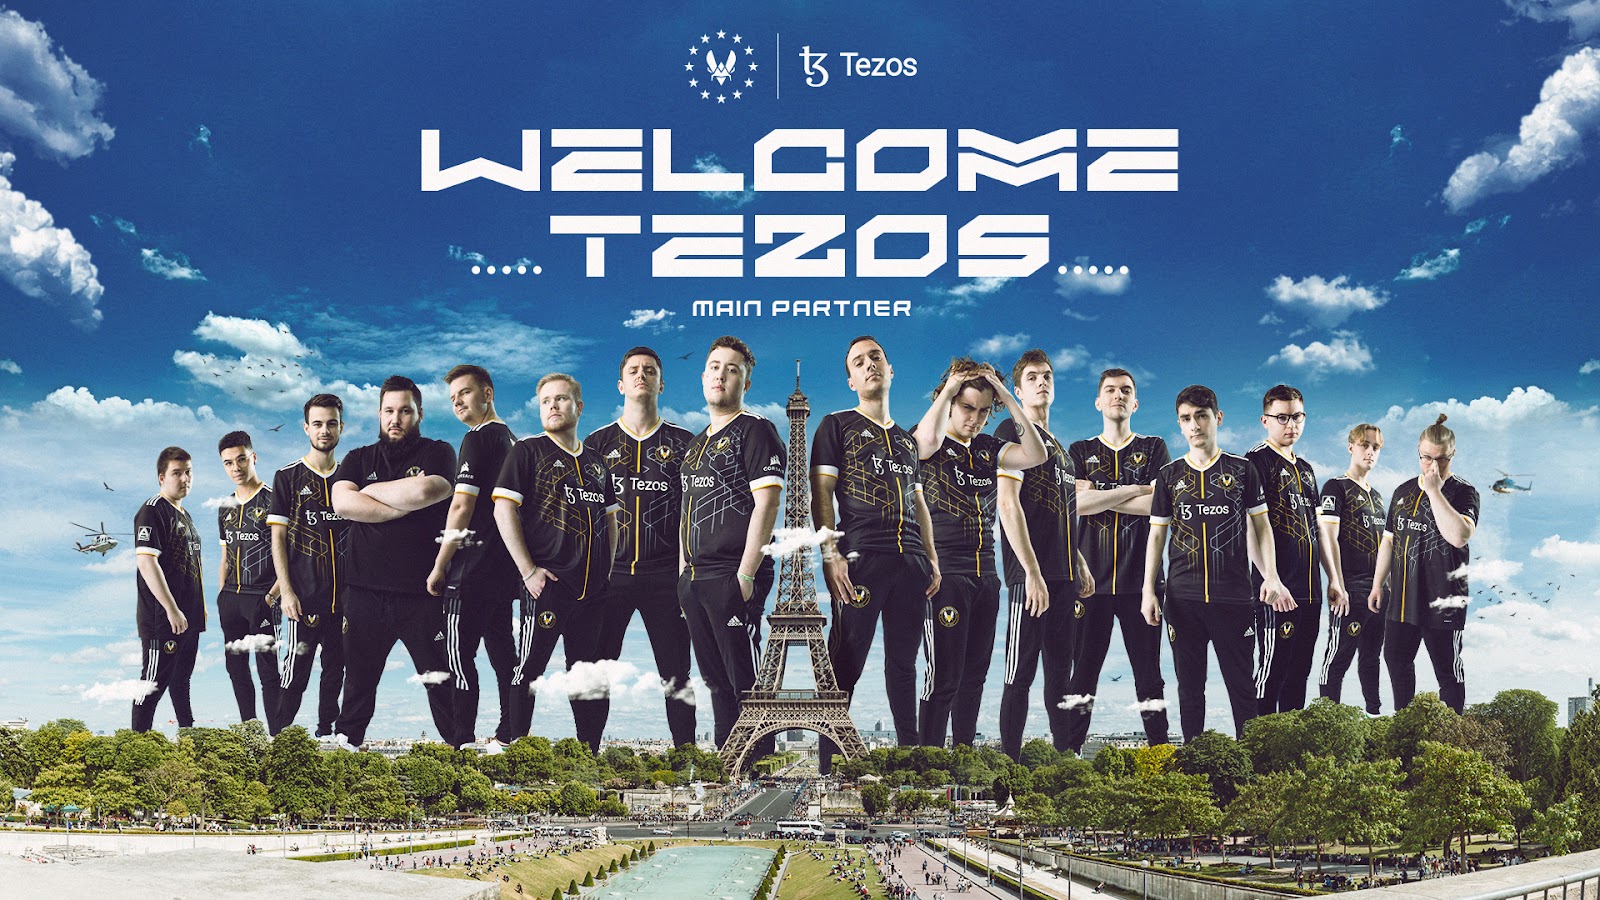 team-vitality-reveals-tezos-as-main-technical-partner-in-historic-long-term-signing